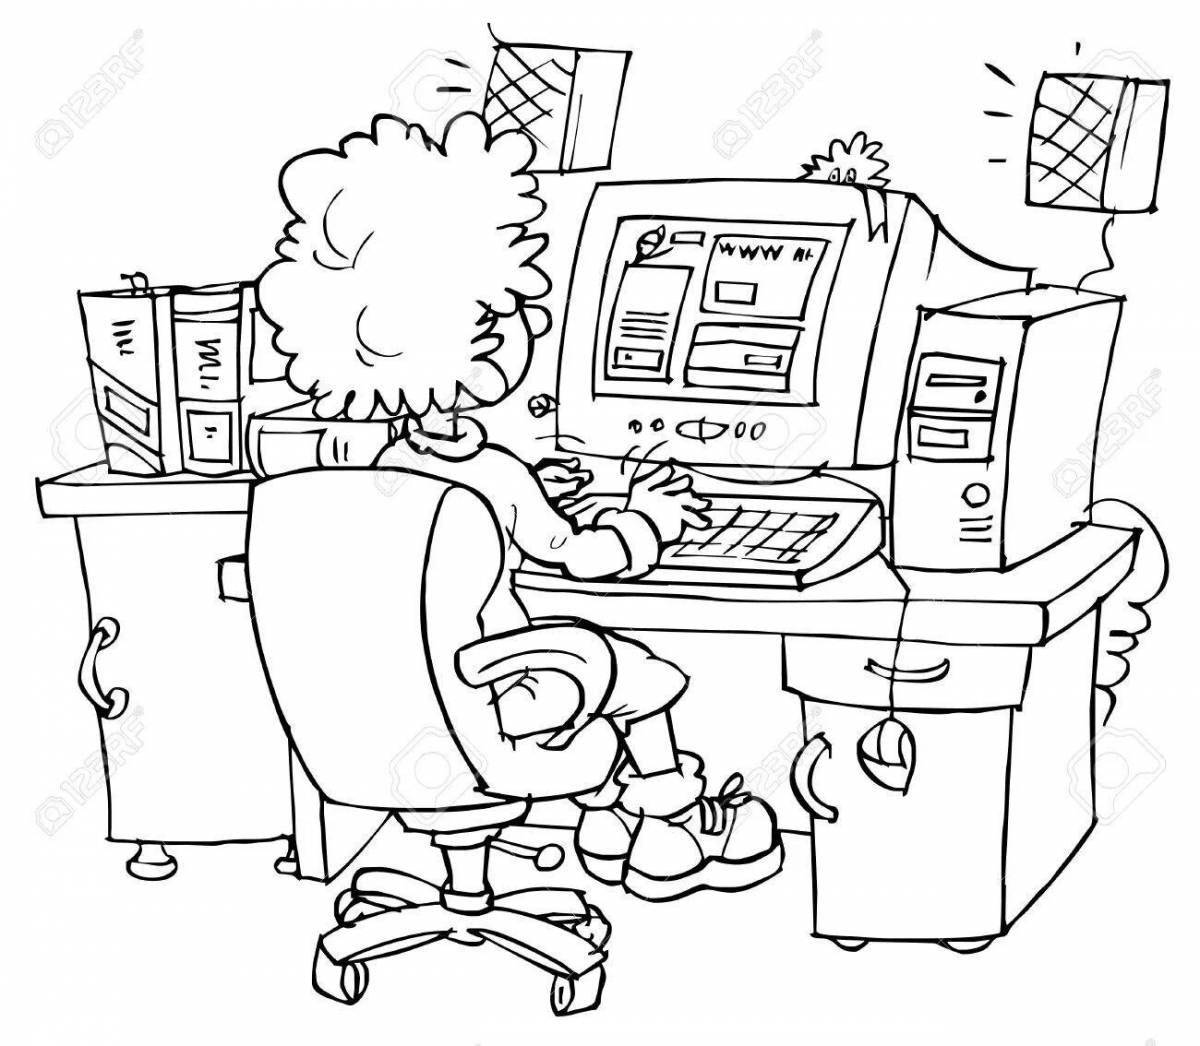 Playful accountant coloring page for kids